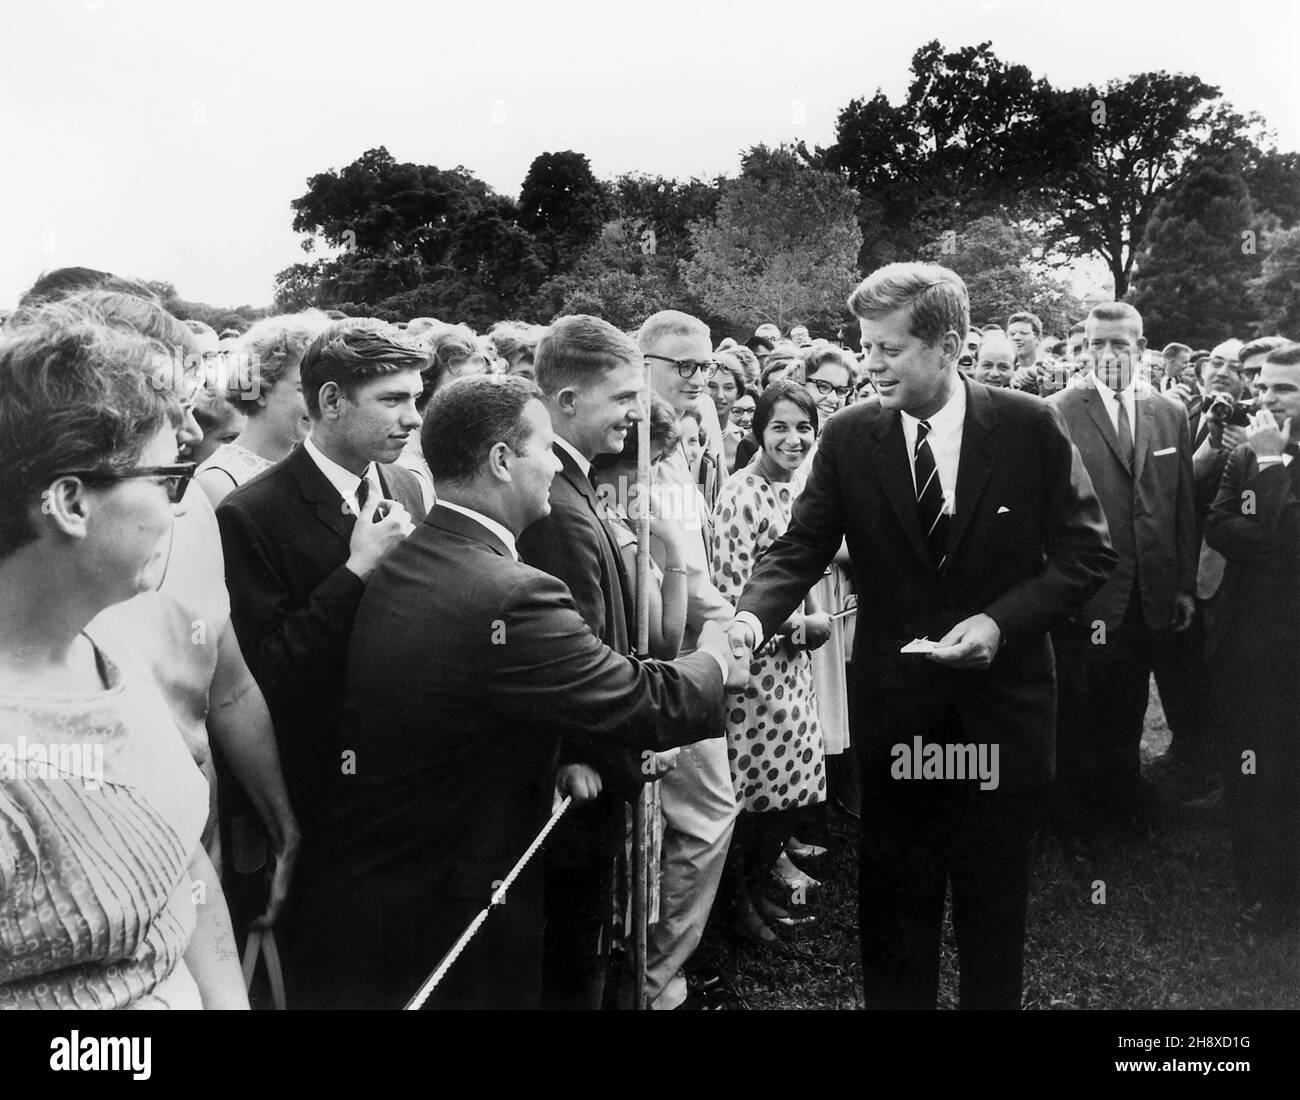 U.S. President John F. Kennedy greeting Peace Corps Volunteers on South Lawn of White House, Washington, D.C., USA, Abbie Rowe, Office White House Photographer, August 9, 1962 Stock Photo